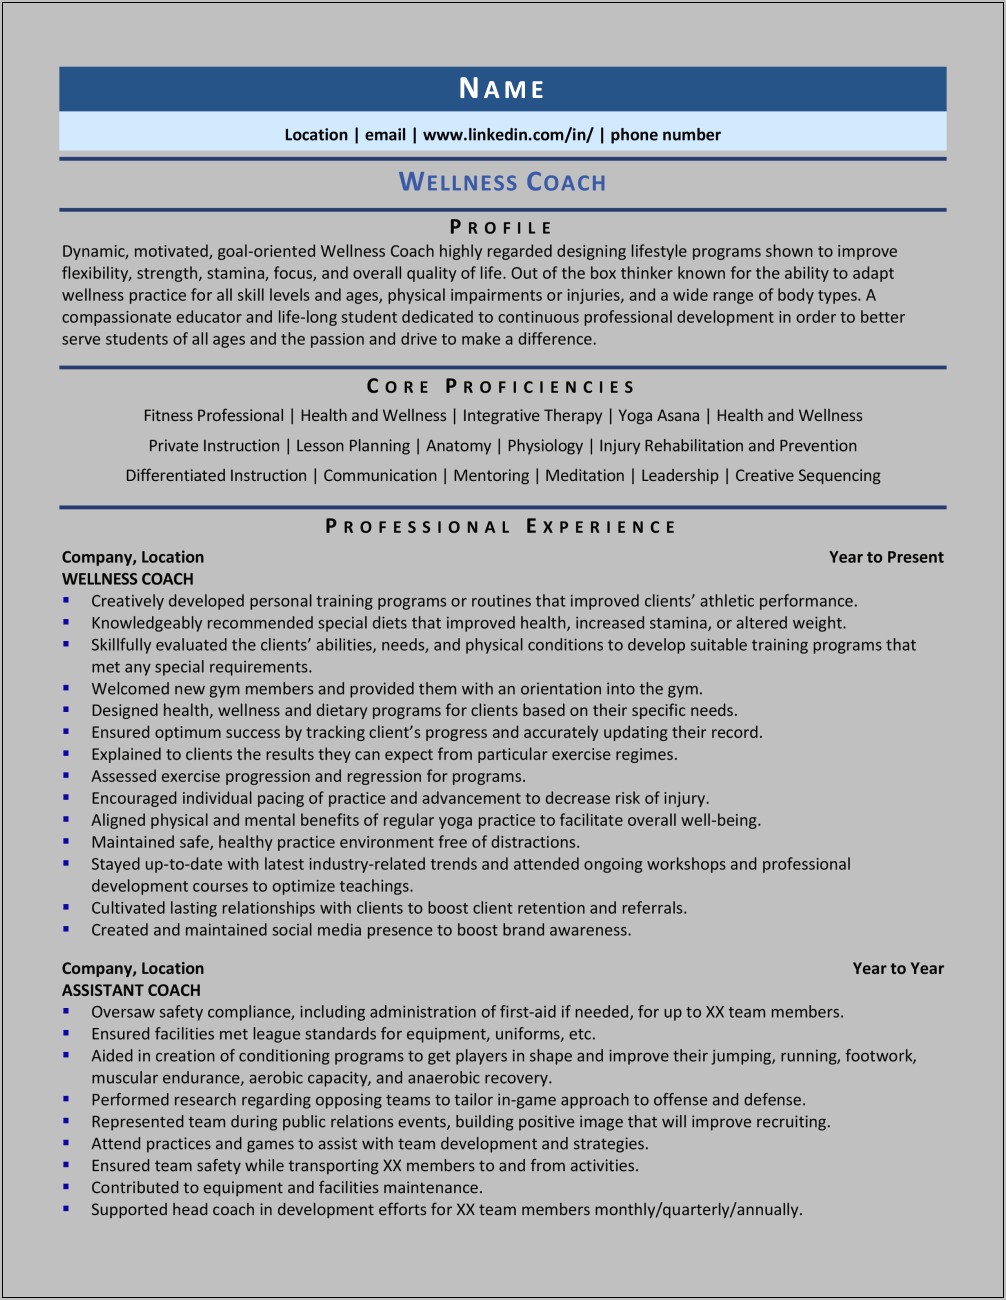 Sample Resume For Career Coach Position